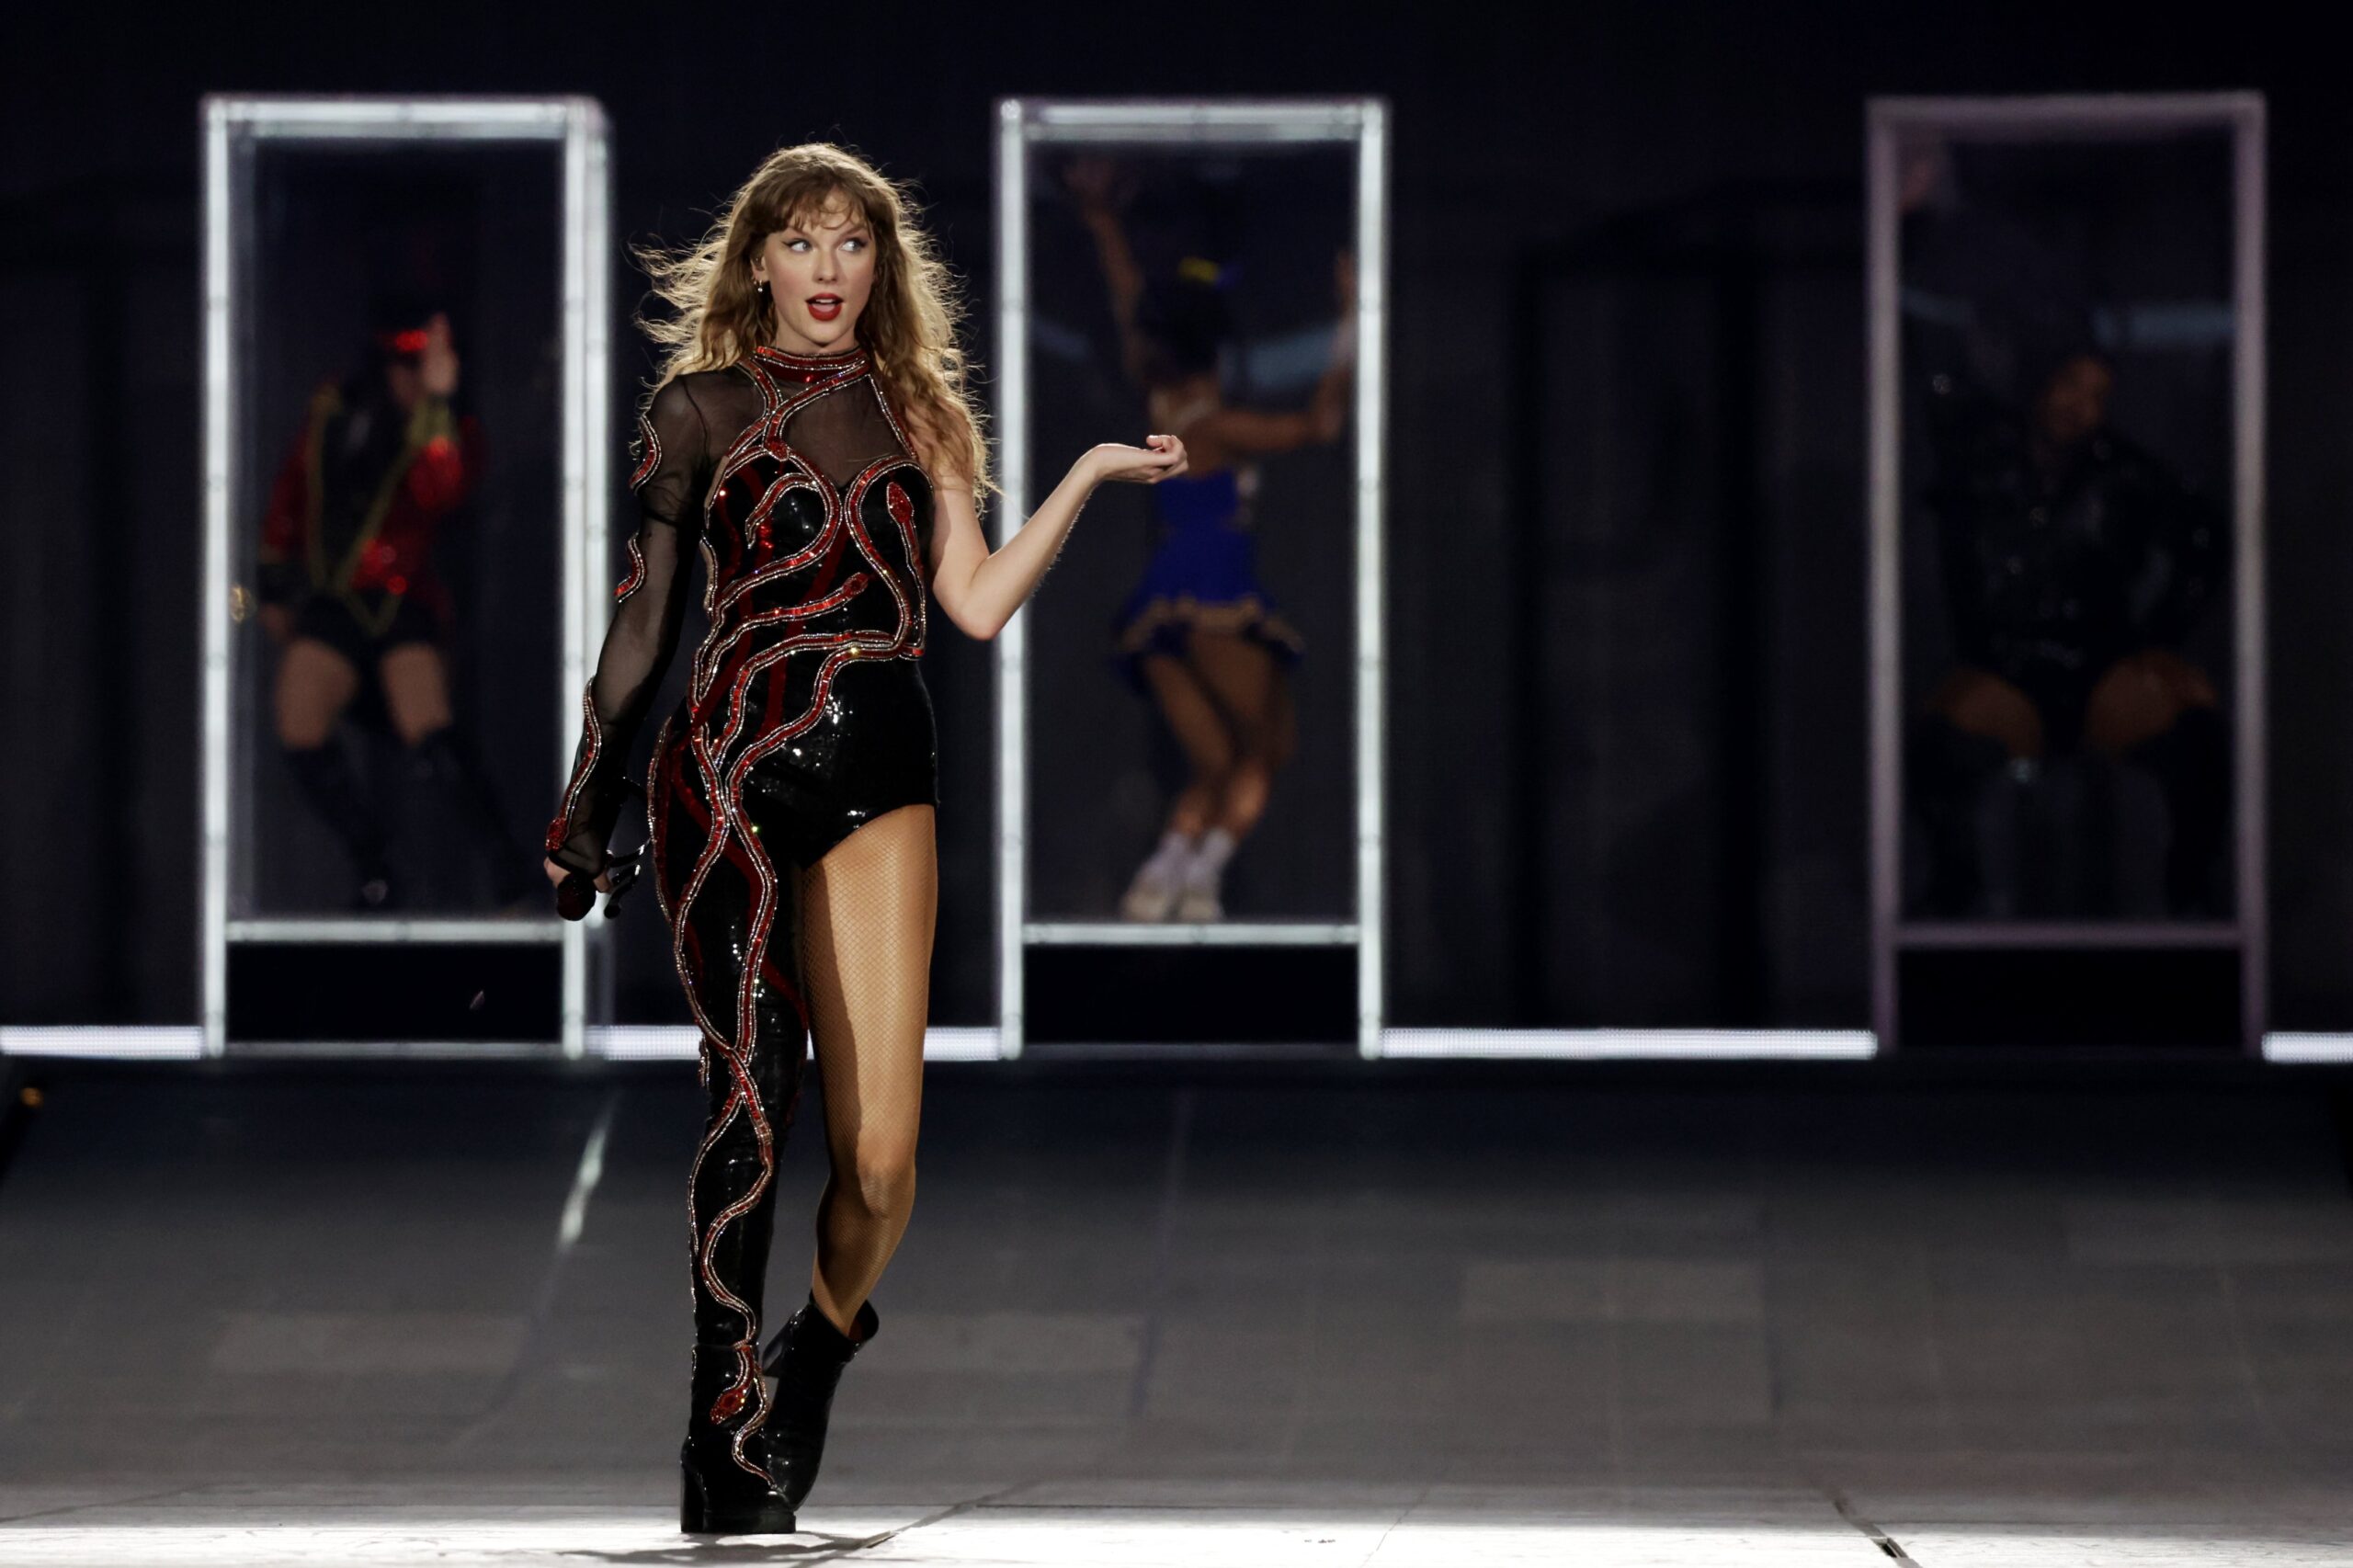 Taylor Swift performing at the Eras Tour in a black jumpsuit.